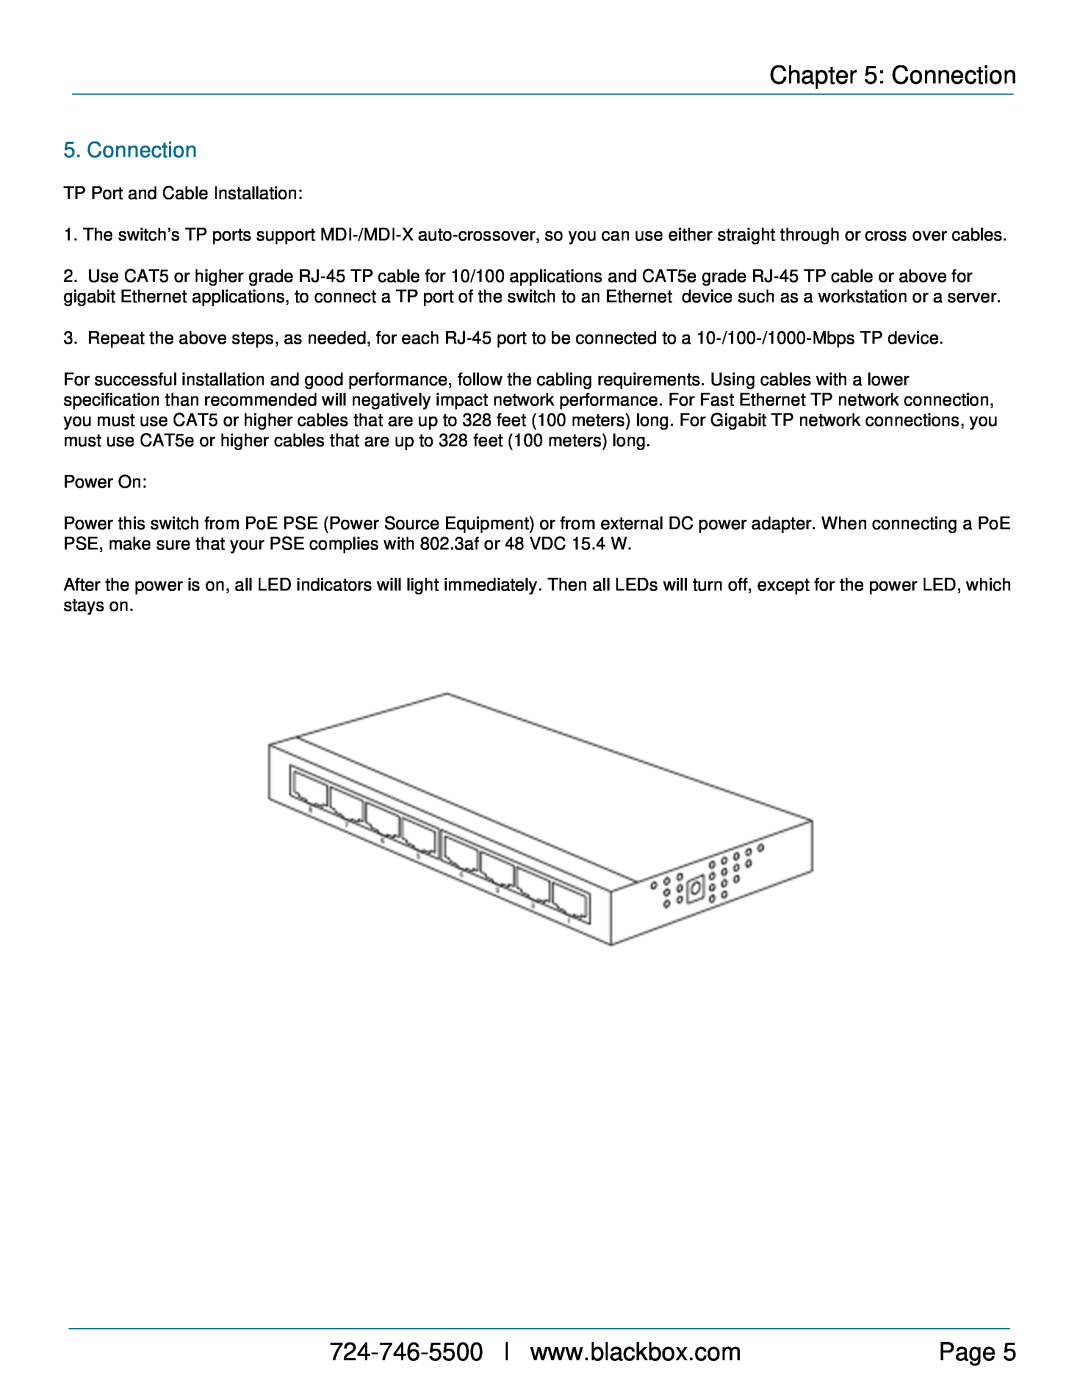 Black Box LPDG705AE, LPDG708AE, 5-/8-Port 10/100/Gigabit Switch with 1 PoE PD Port manual Connection, Page 